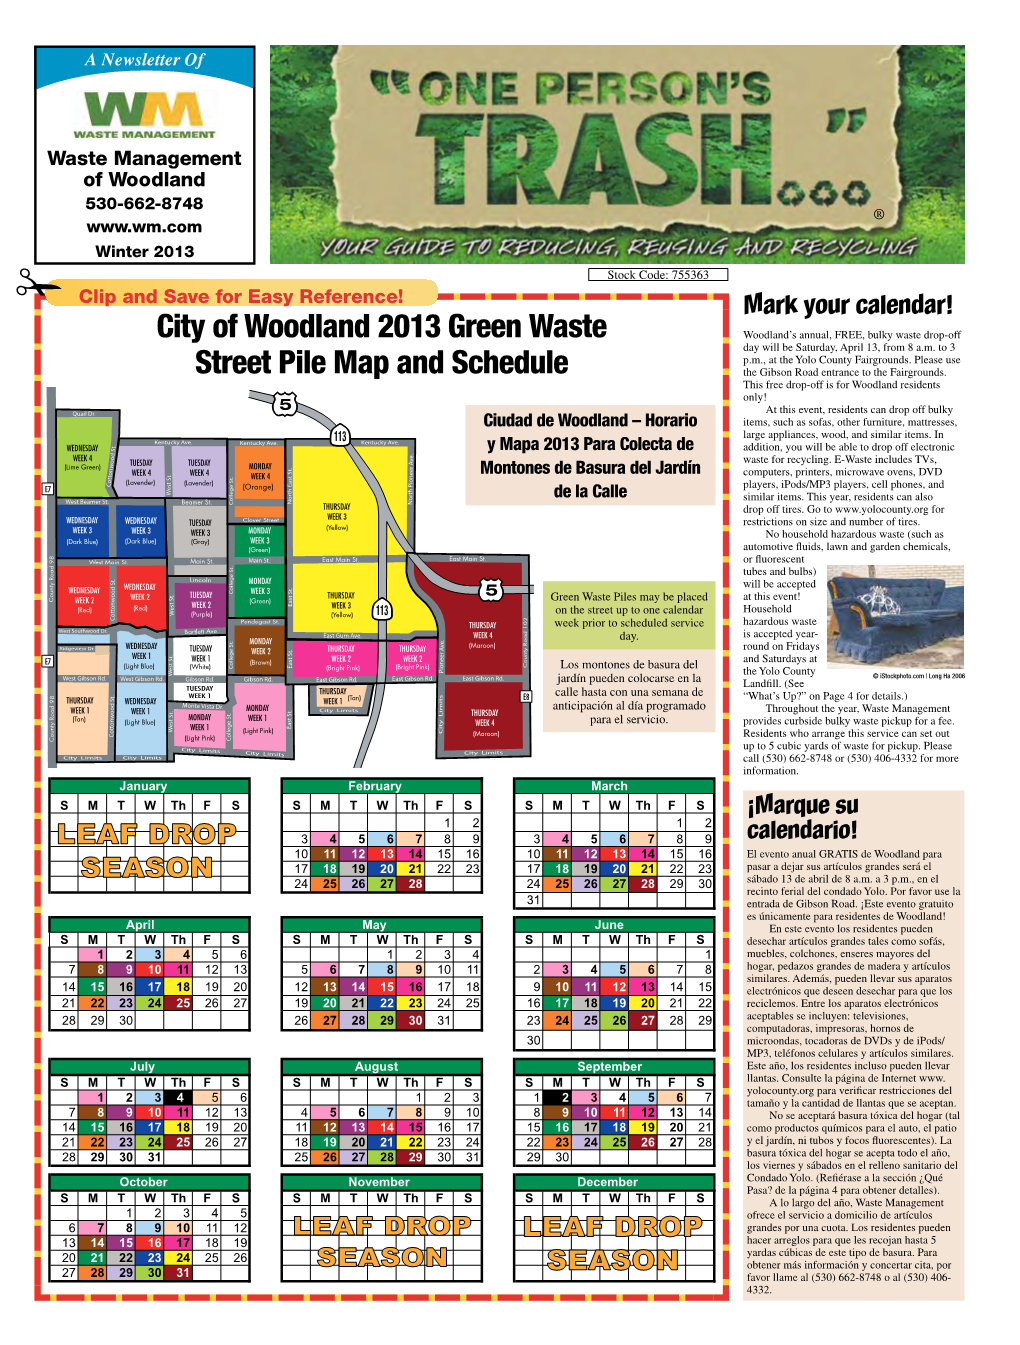 City of Woodland 2013 Green Waste Street Pile Map and Schedule